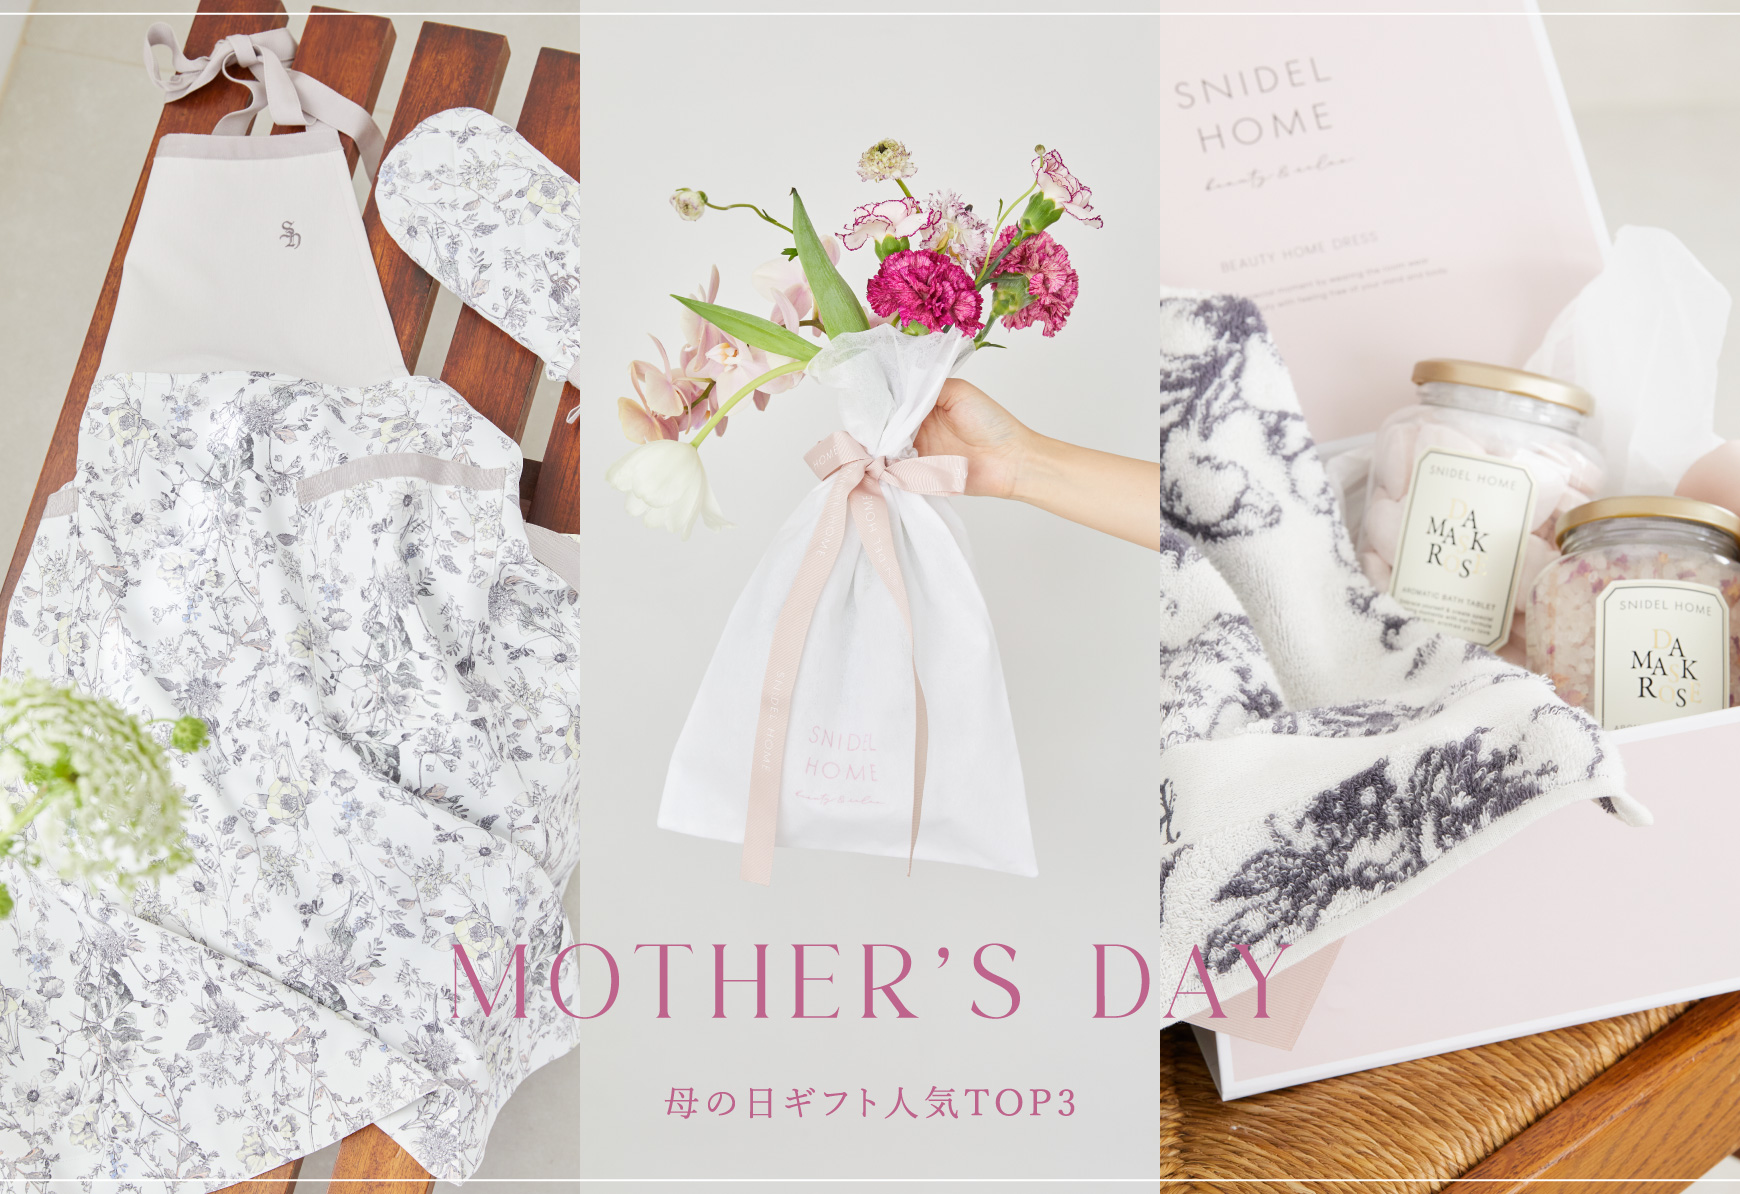 Mother’s day 母の日ギフト人気TOP3